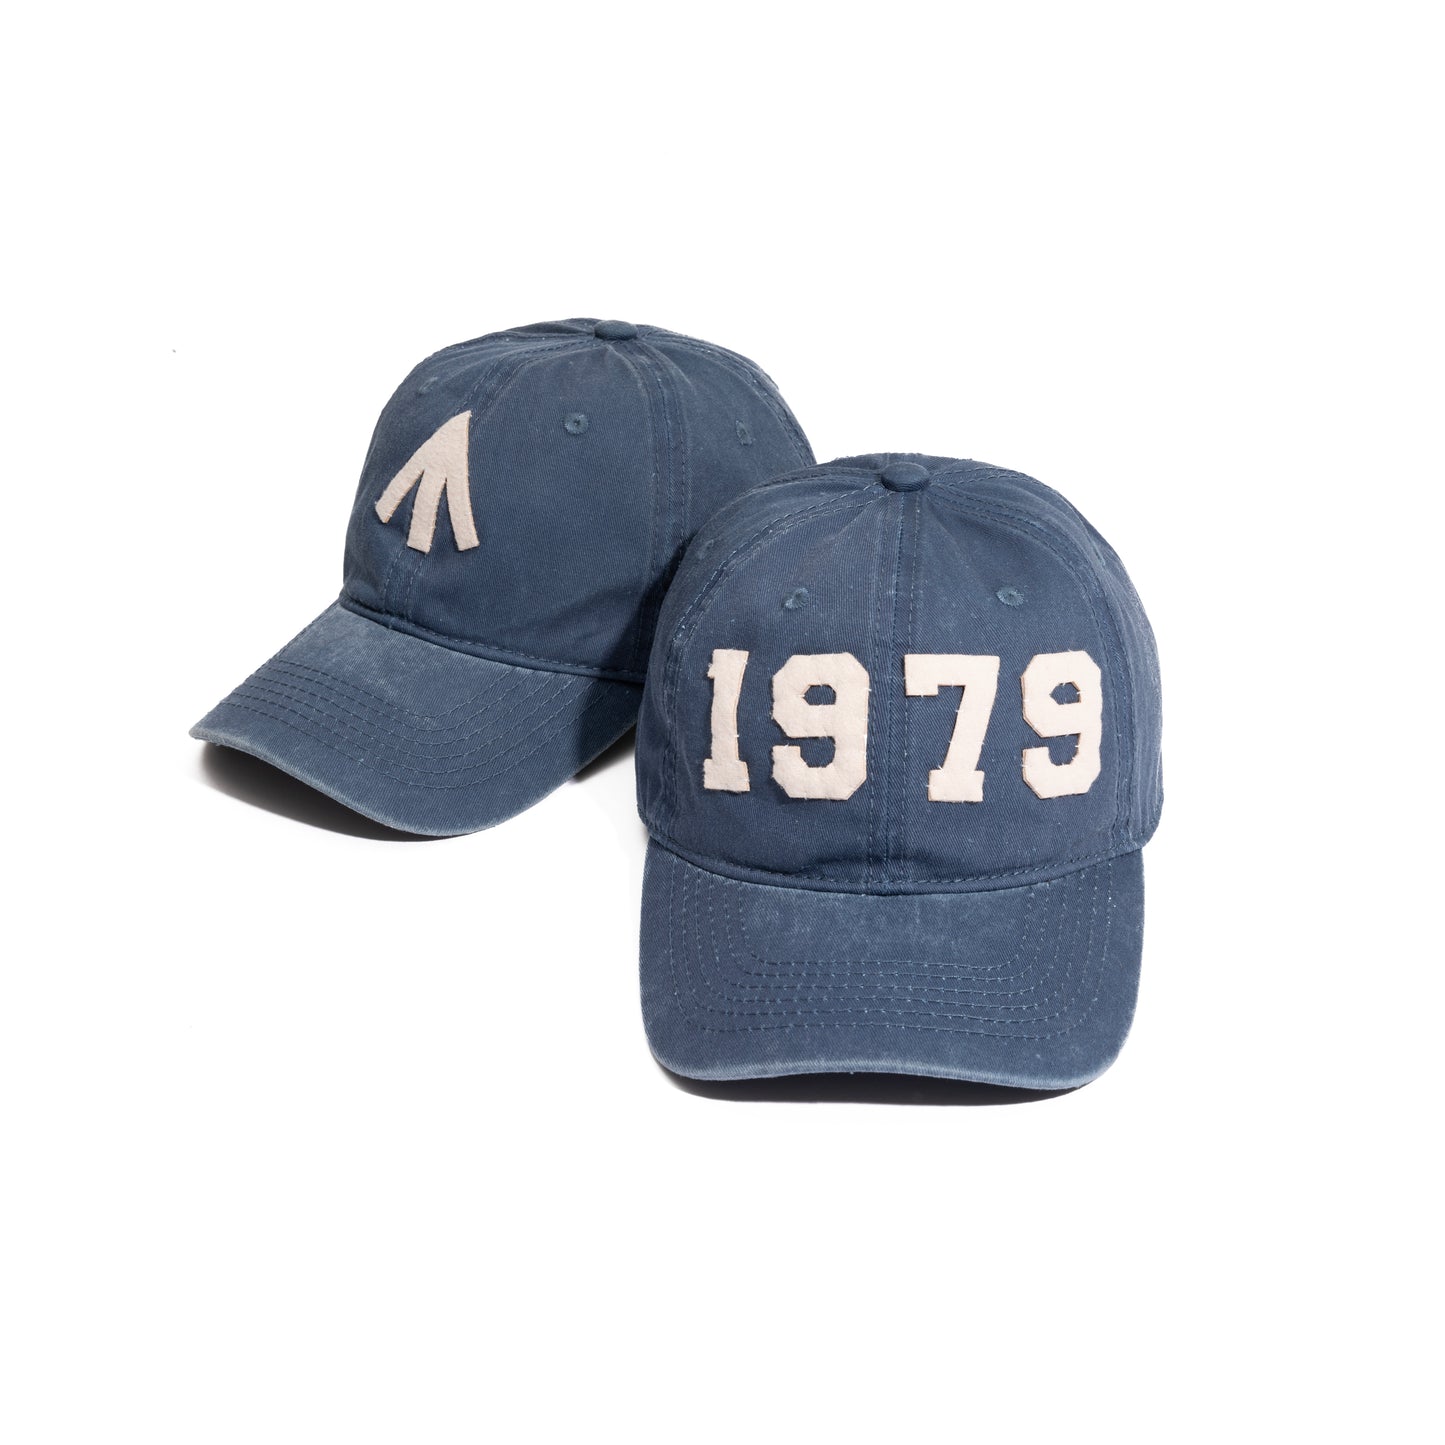 [PREORDER] FADED WASHED HAND QUILTED “1979” CAP